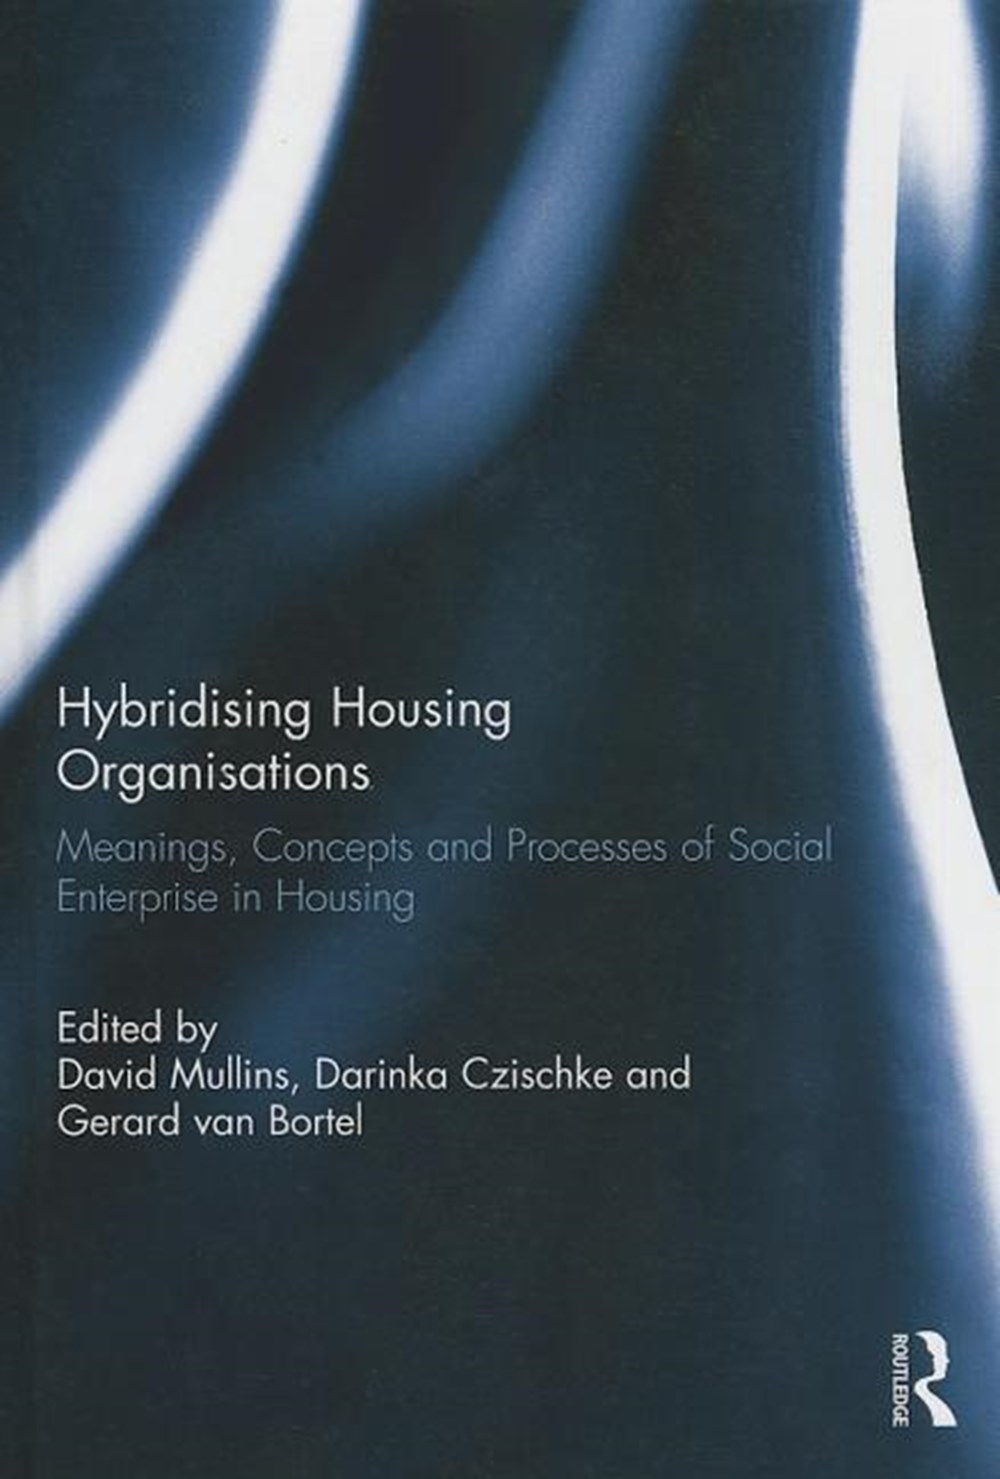 Hybridising Housing Organisations: Meanings, Concepts and Processes of Social Enterprise in Housing